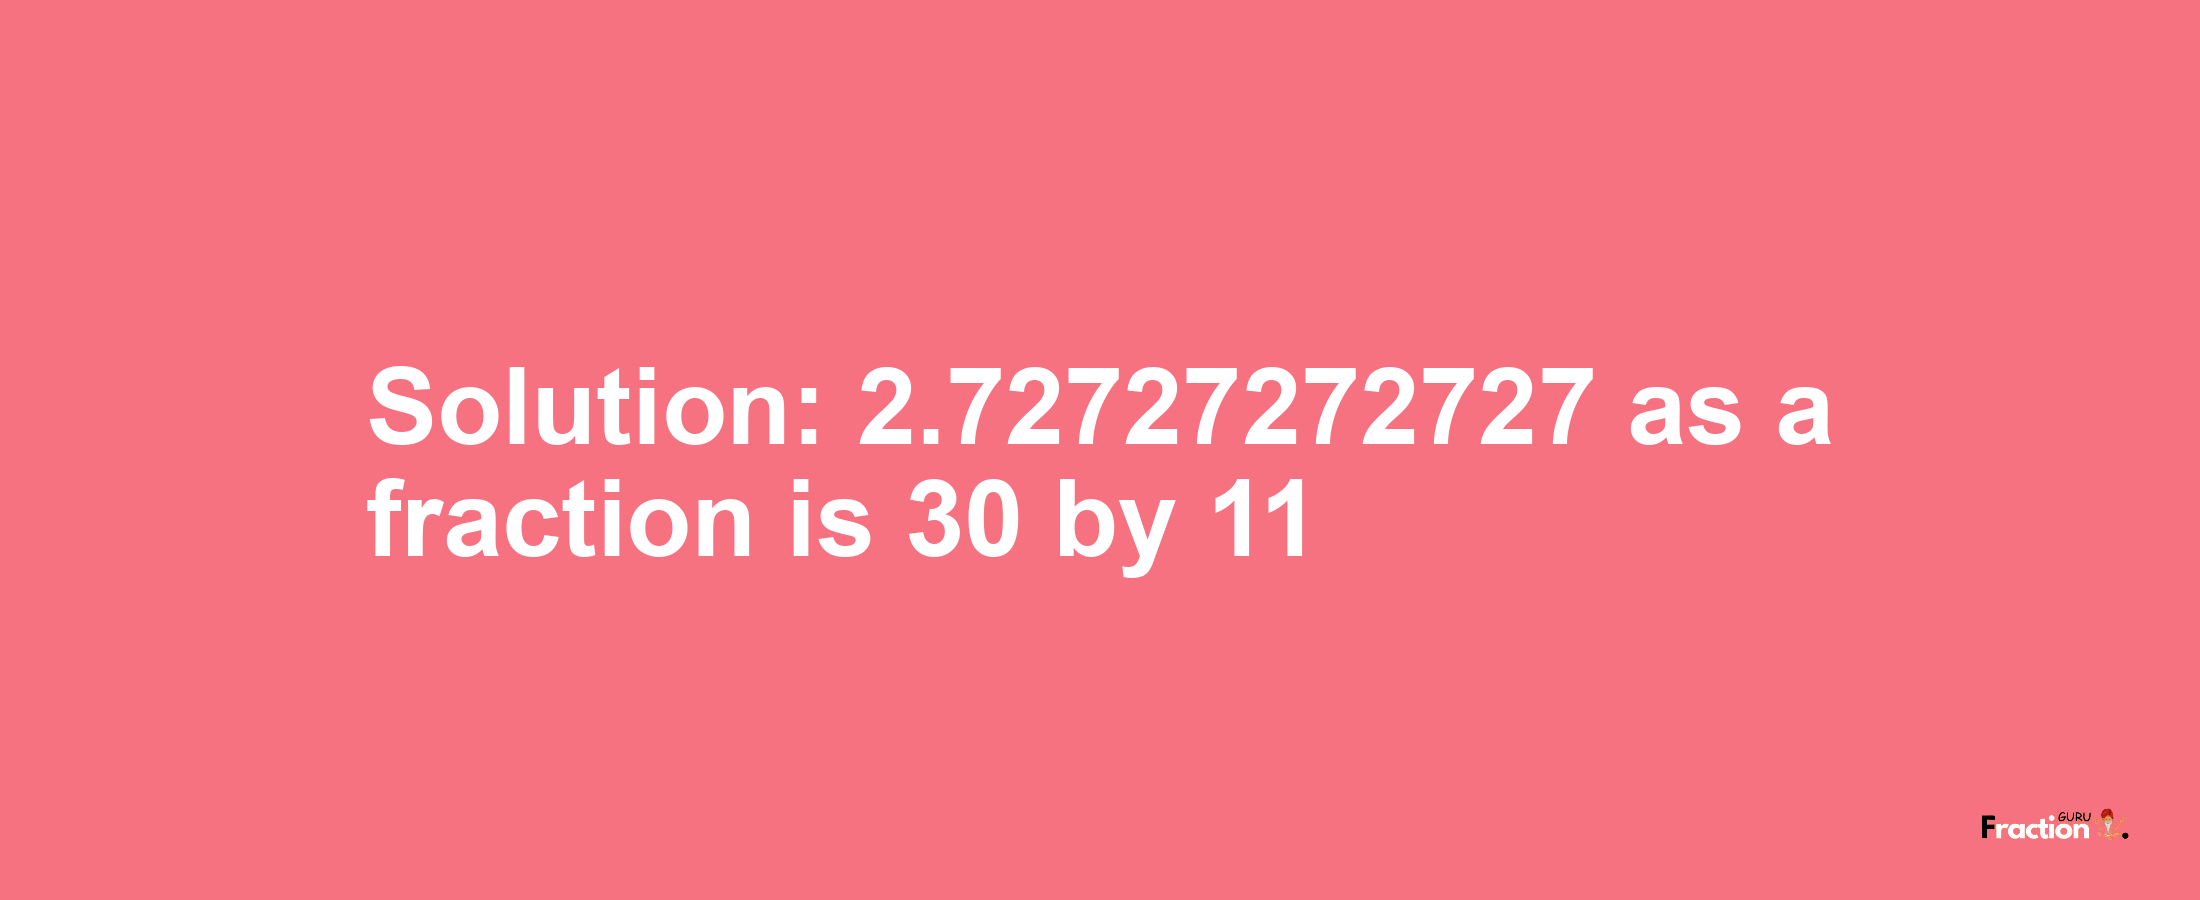 Solution:2.72727272727 as a fraction is 30/11